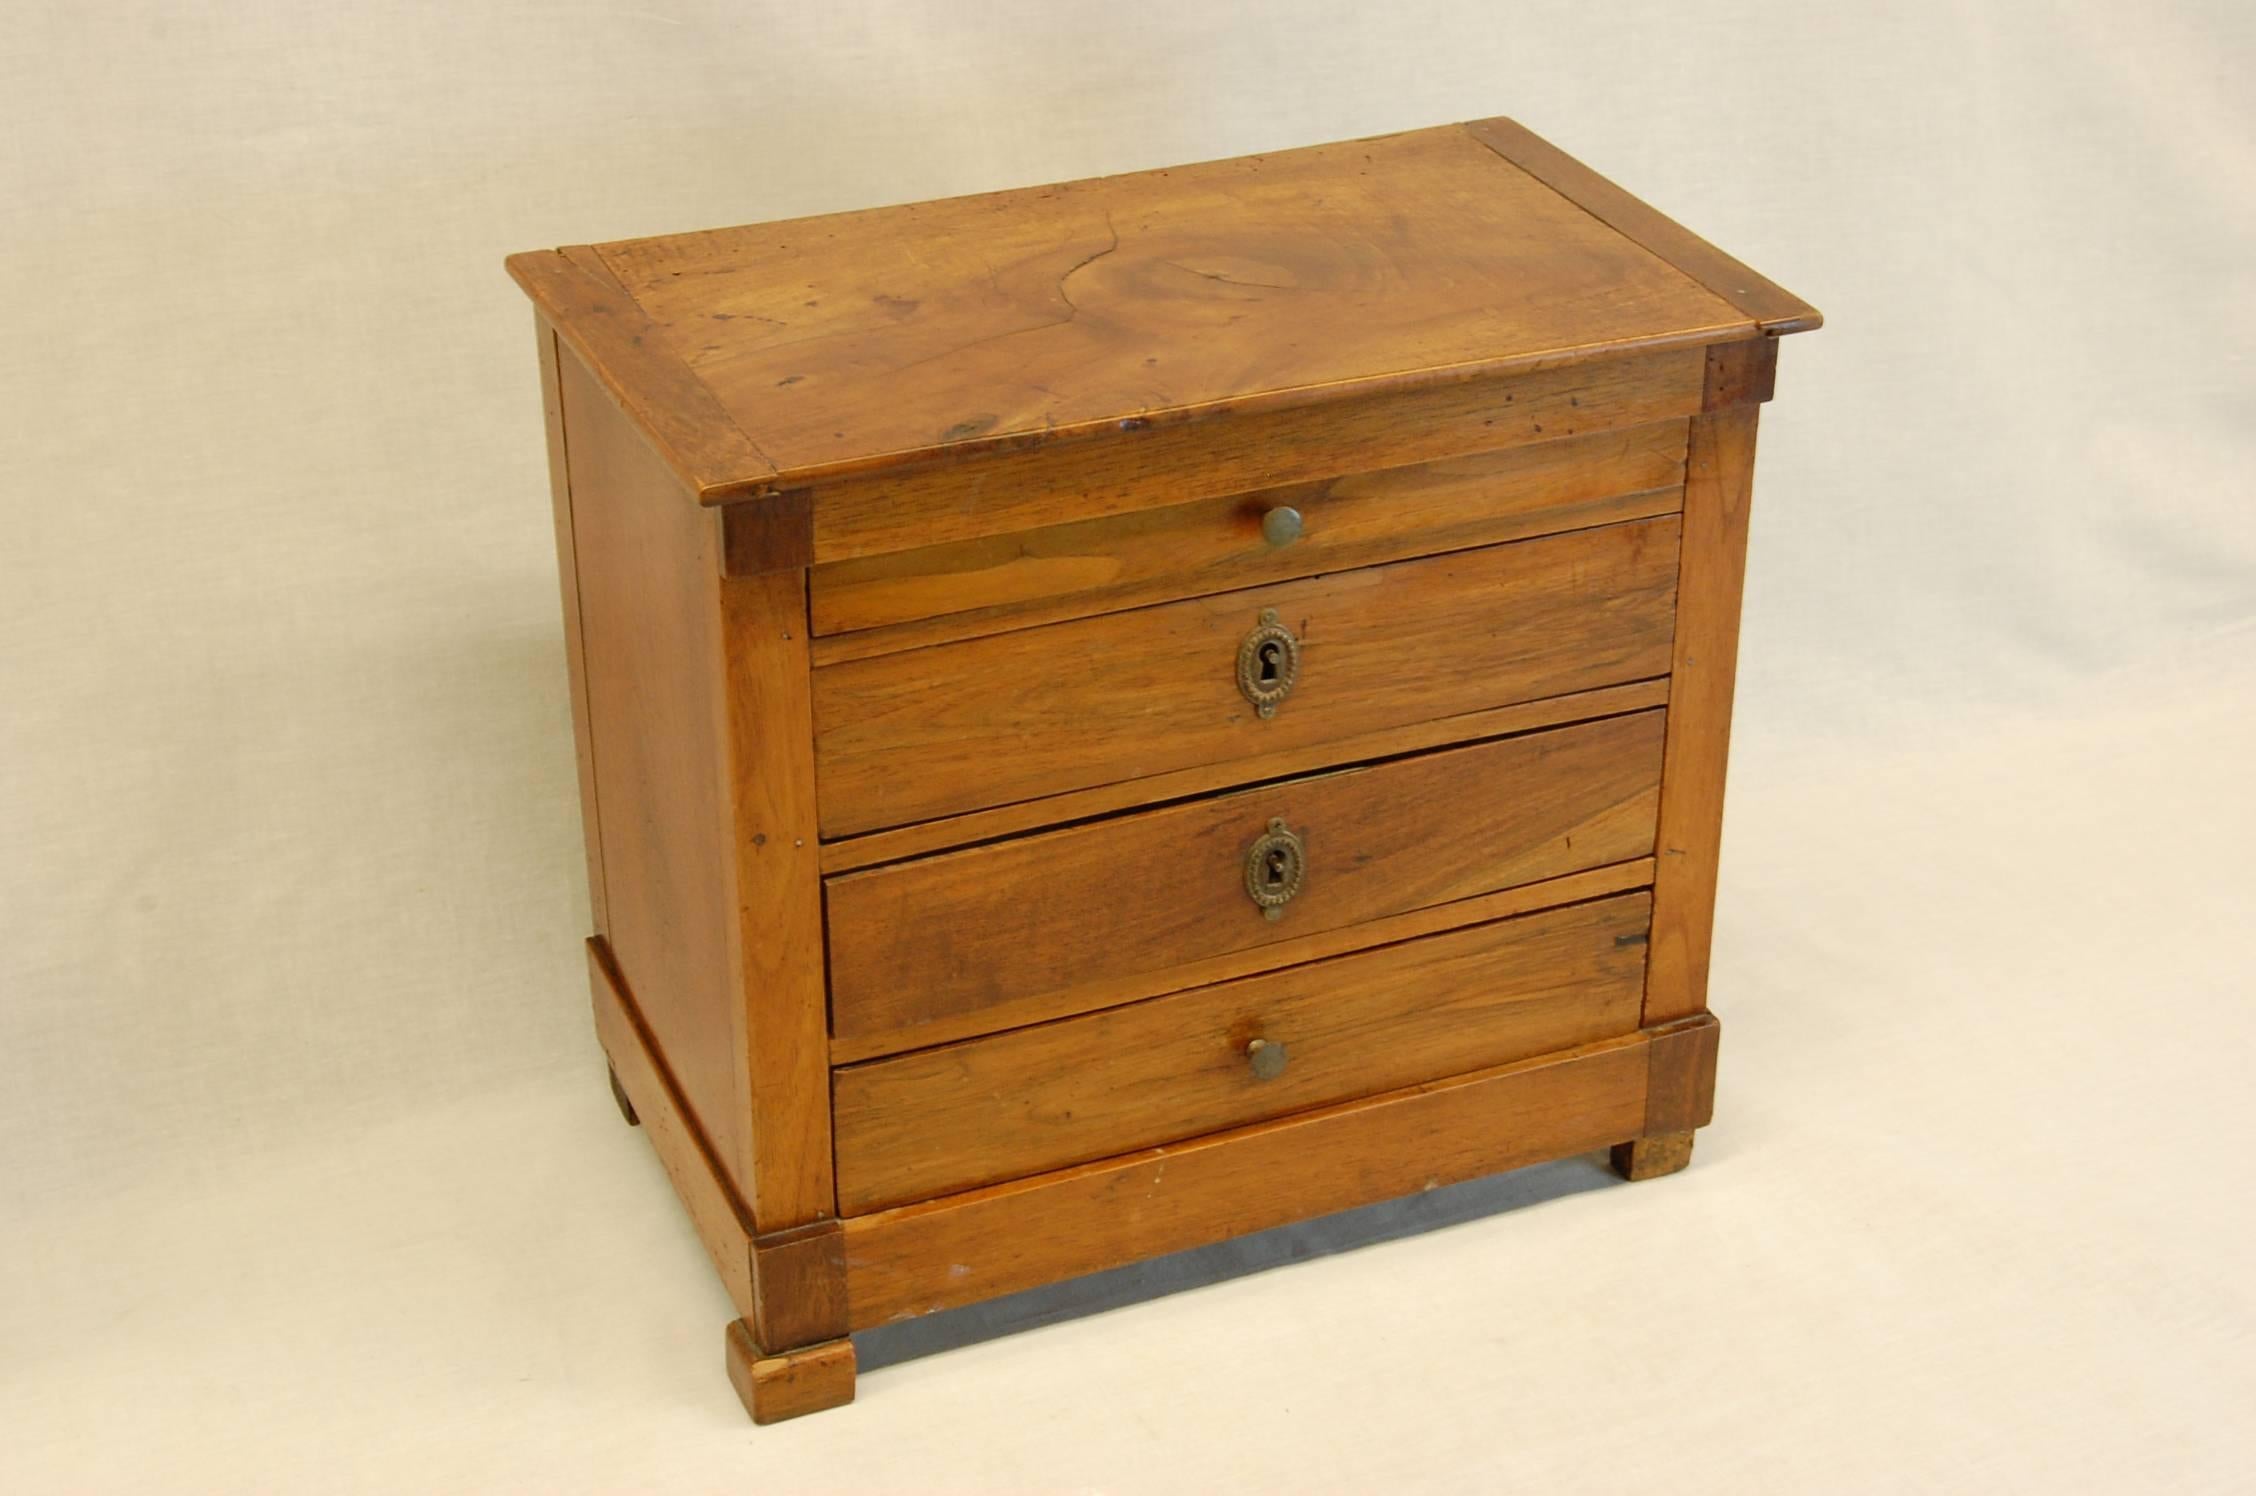 Wonderful miniature chest with four drawers, two of the drawers have locks but no keys. Missing the right front foot trim, otherwise good condition.